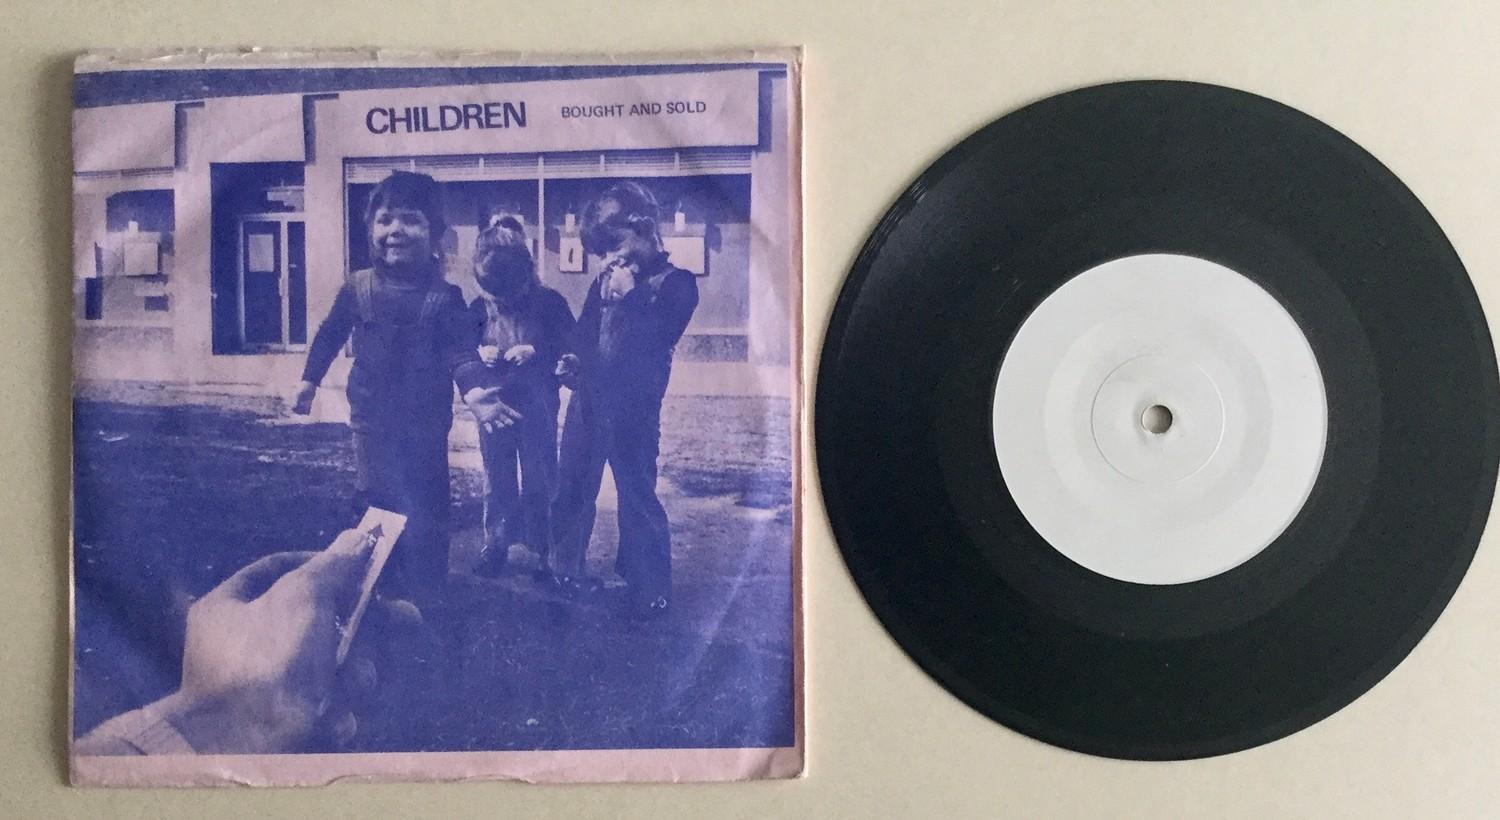 VICTIMIZE 7" PROMO SINGLE 'BABY BUYER'. An original rare first pressing punk record on the I.M.E. - Image 2 of 2